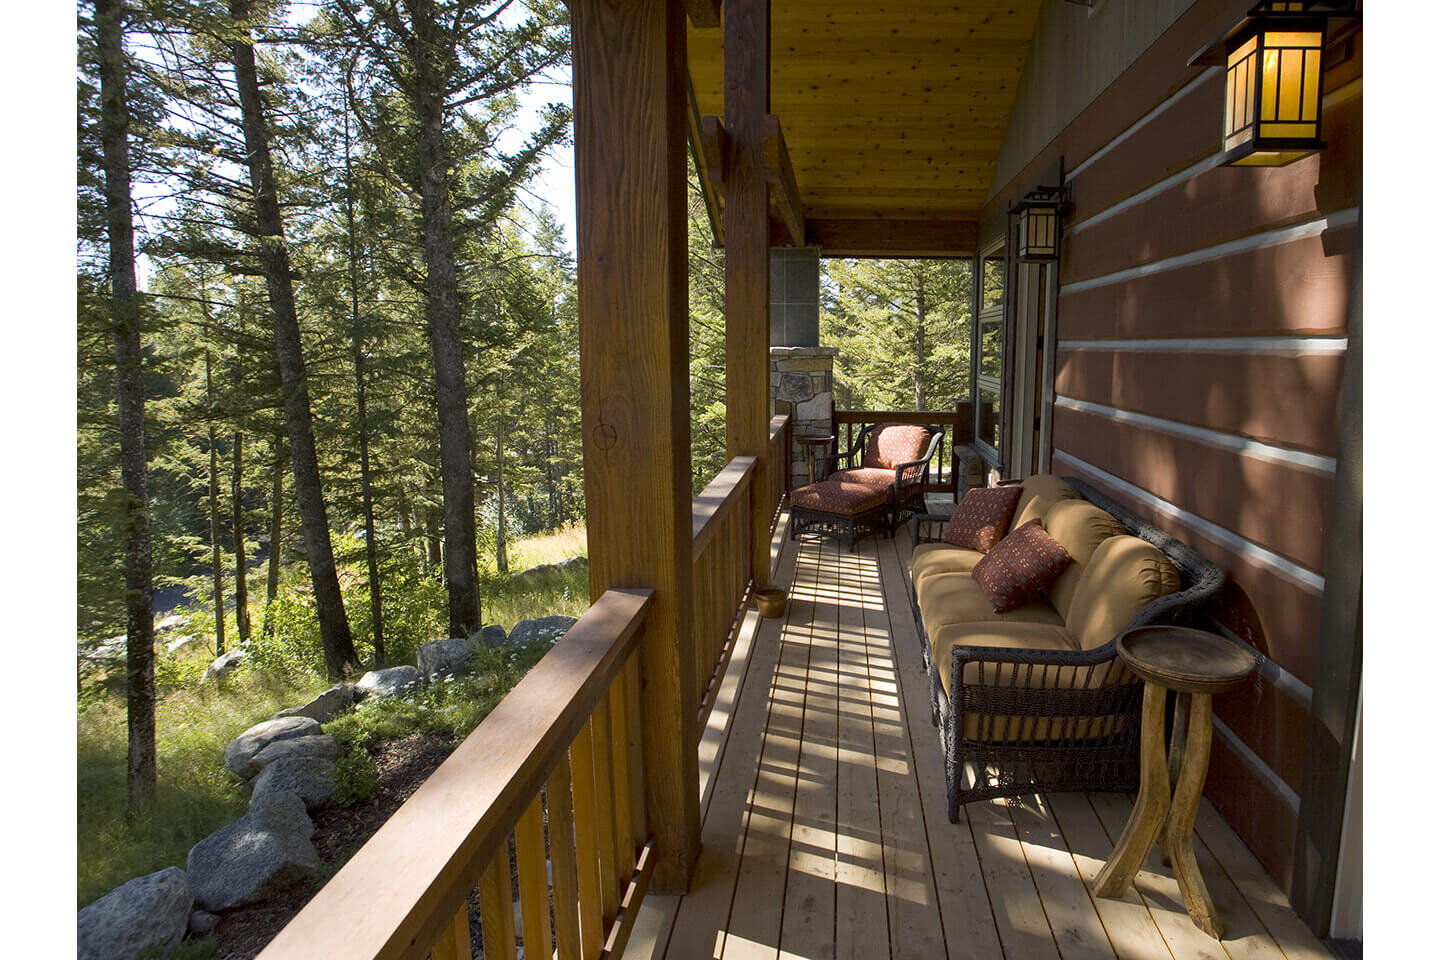 Balcony with view into the forest